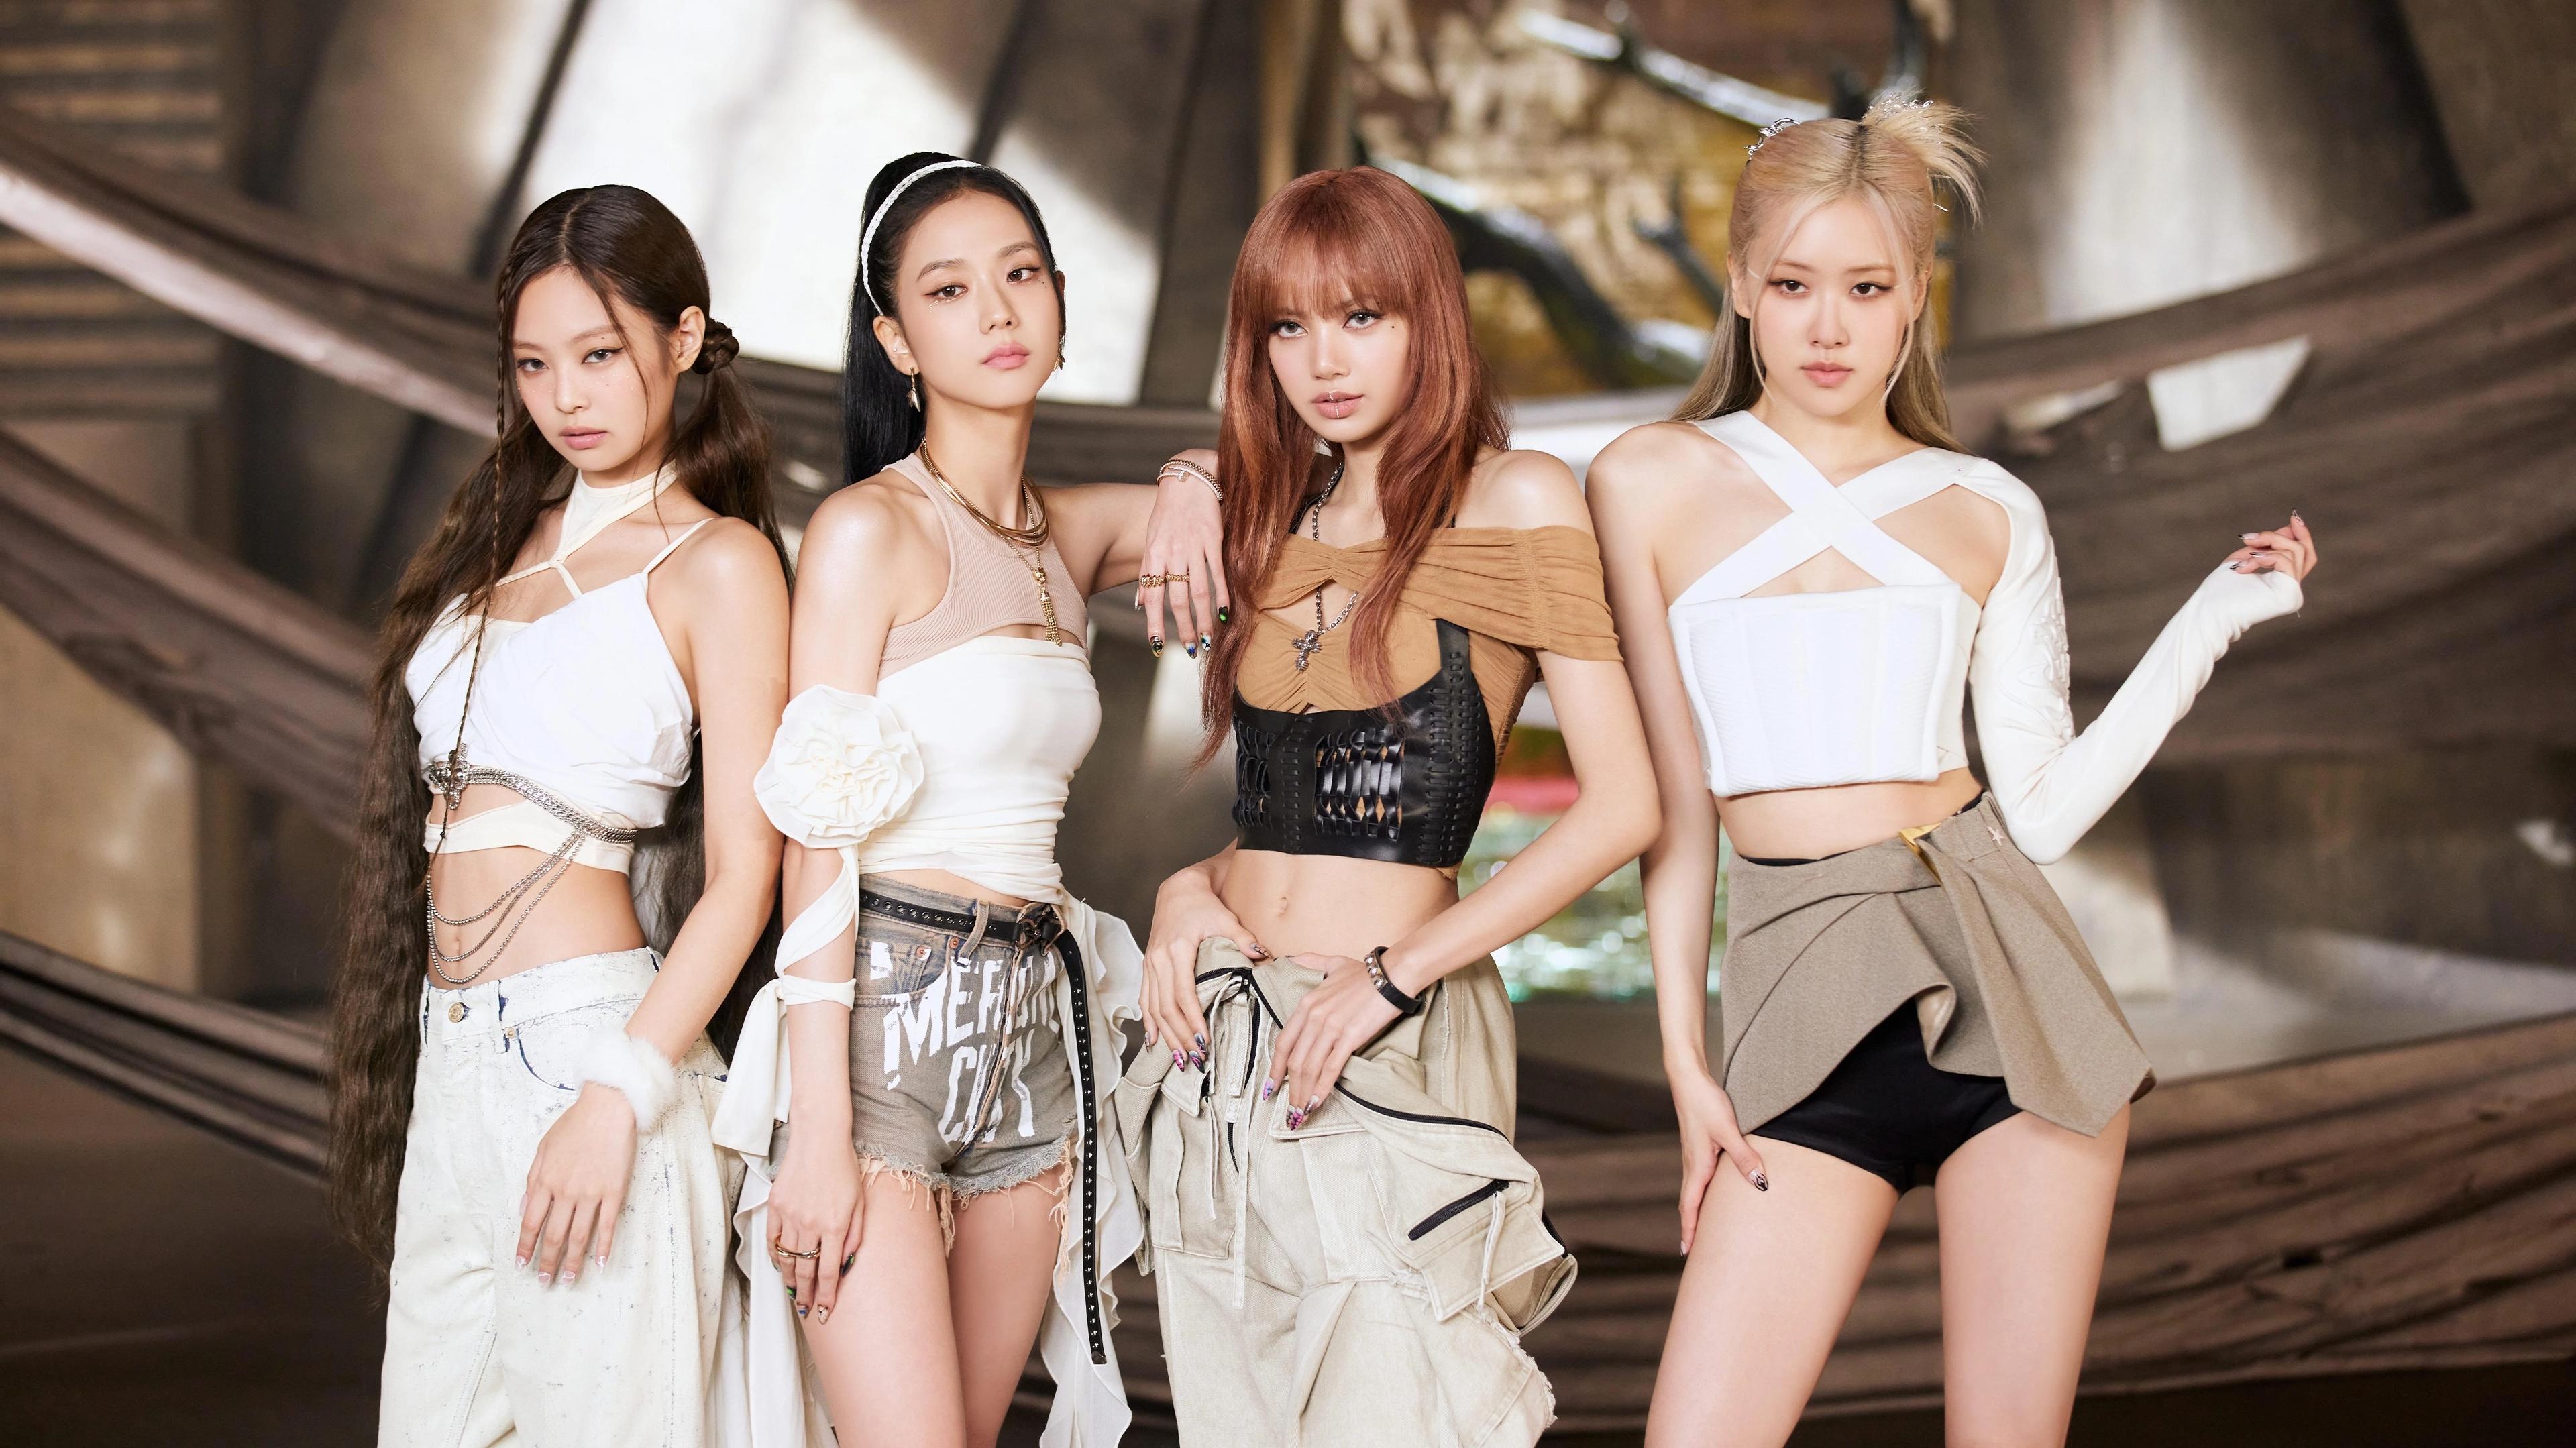 Daily Music Roll On Ygofficialblink Hits Billion